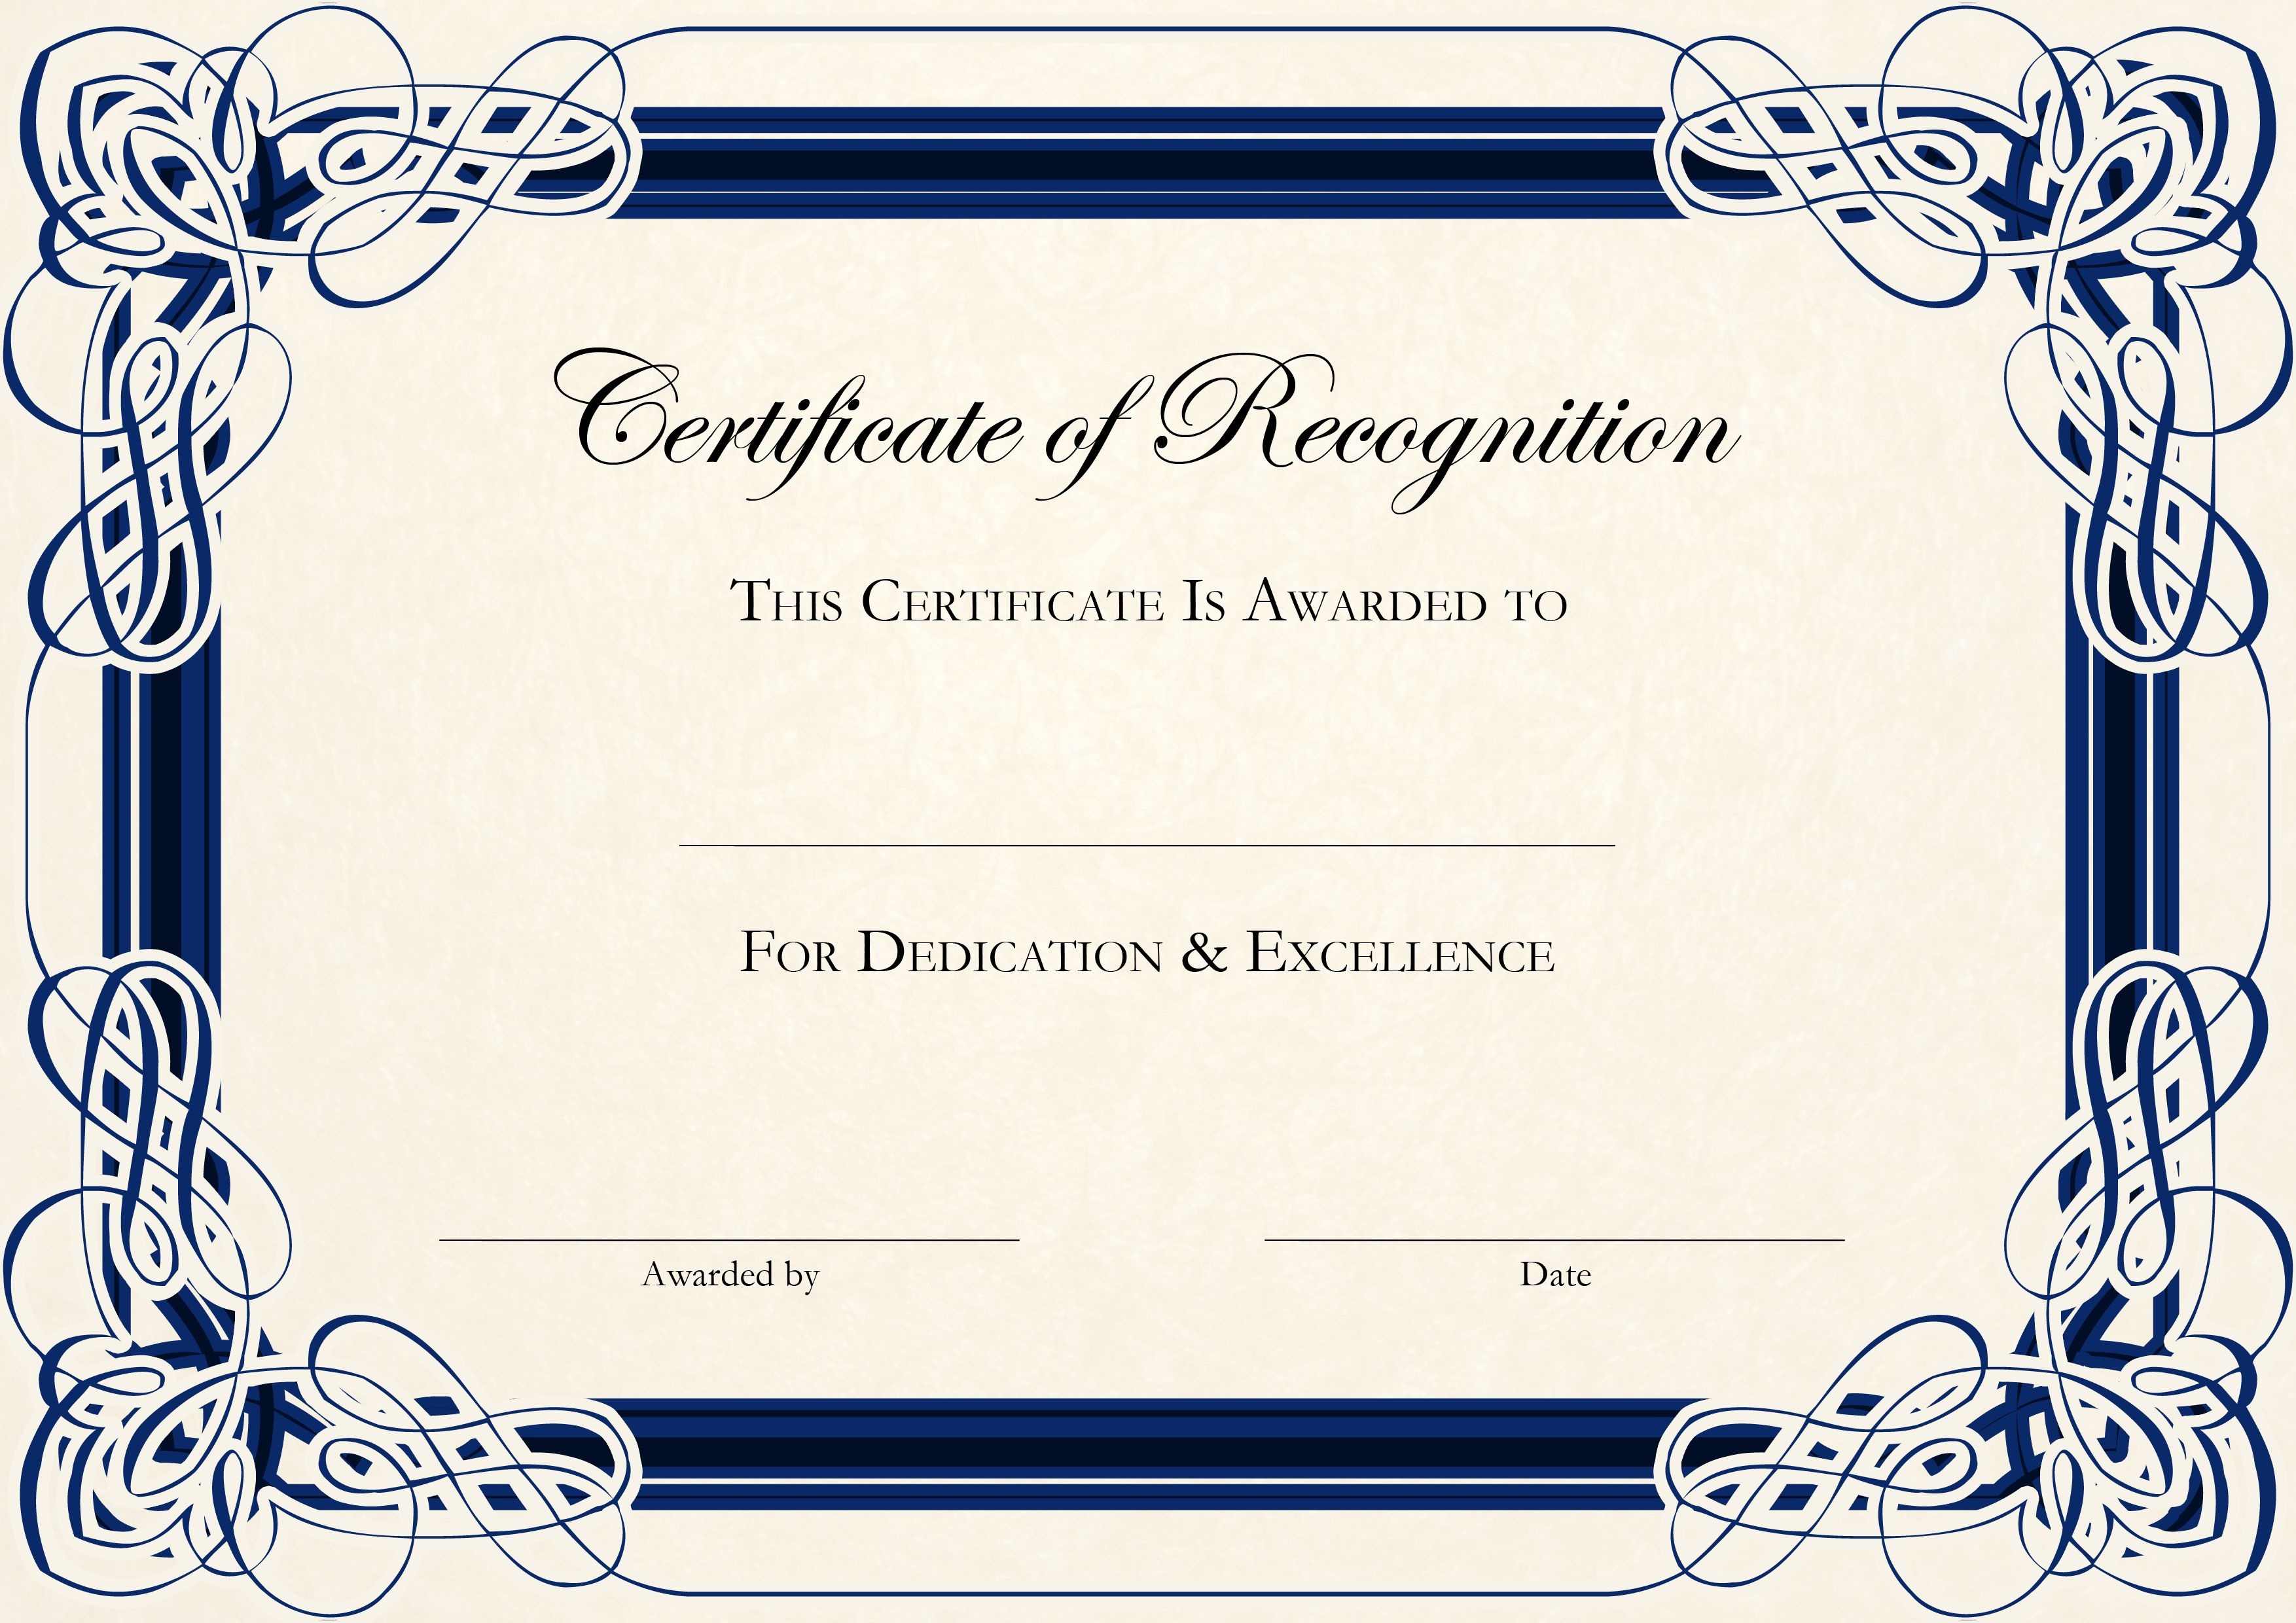 Sports Cetificate | Certificate Of Recognition A4 Thumbnail - Sports Certificate Templates Free Printable